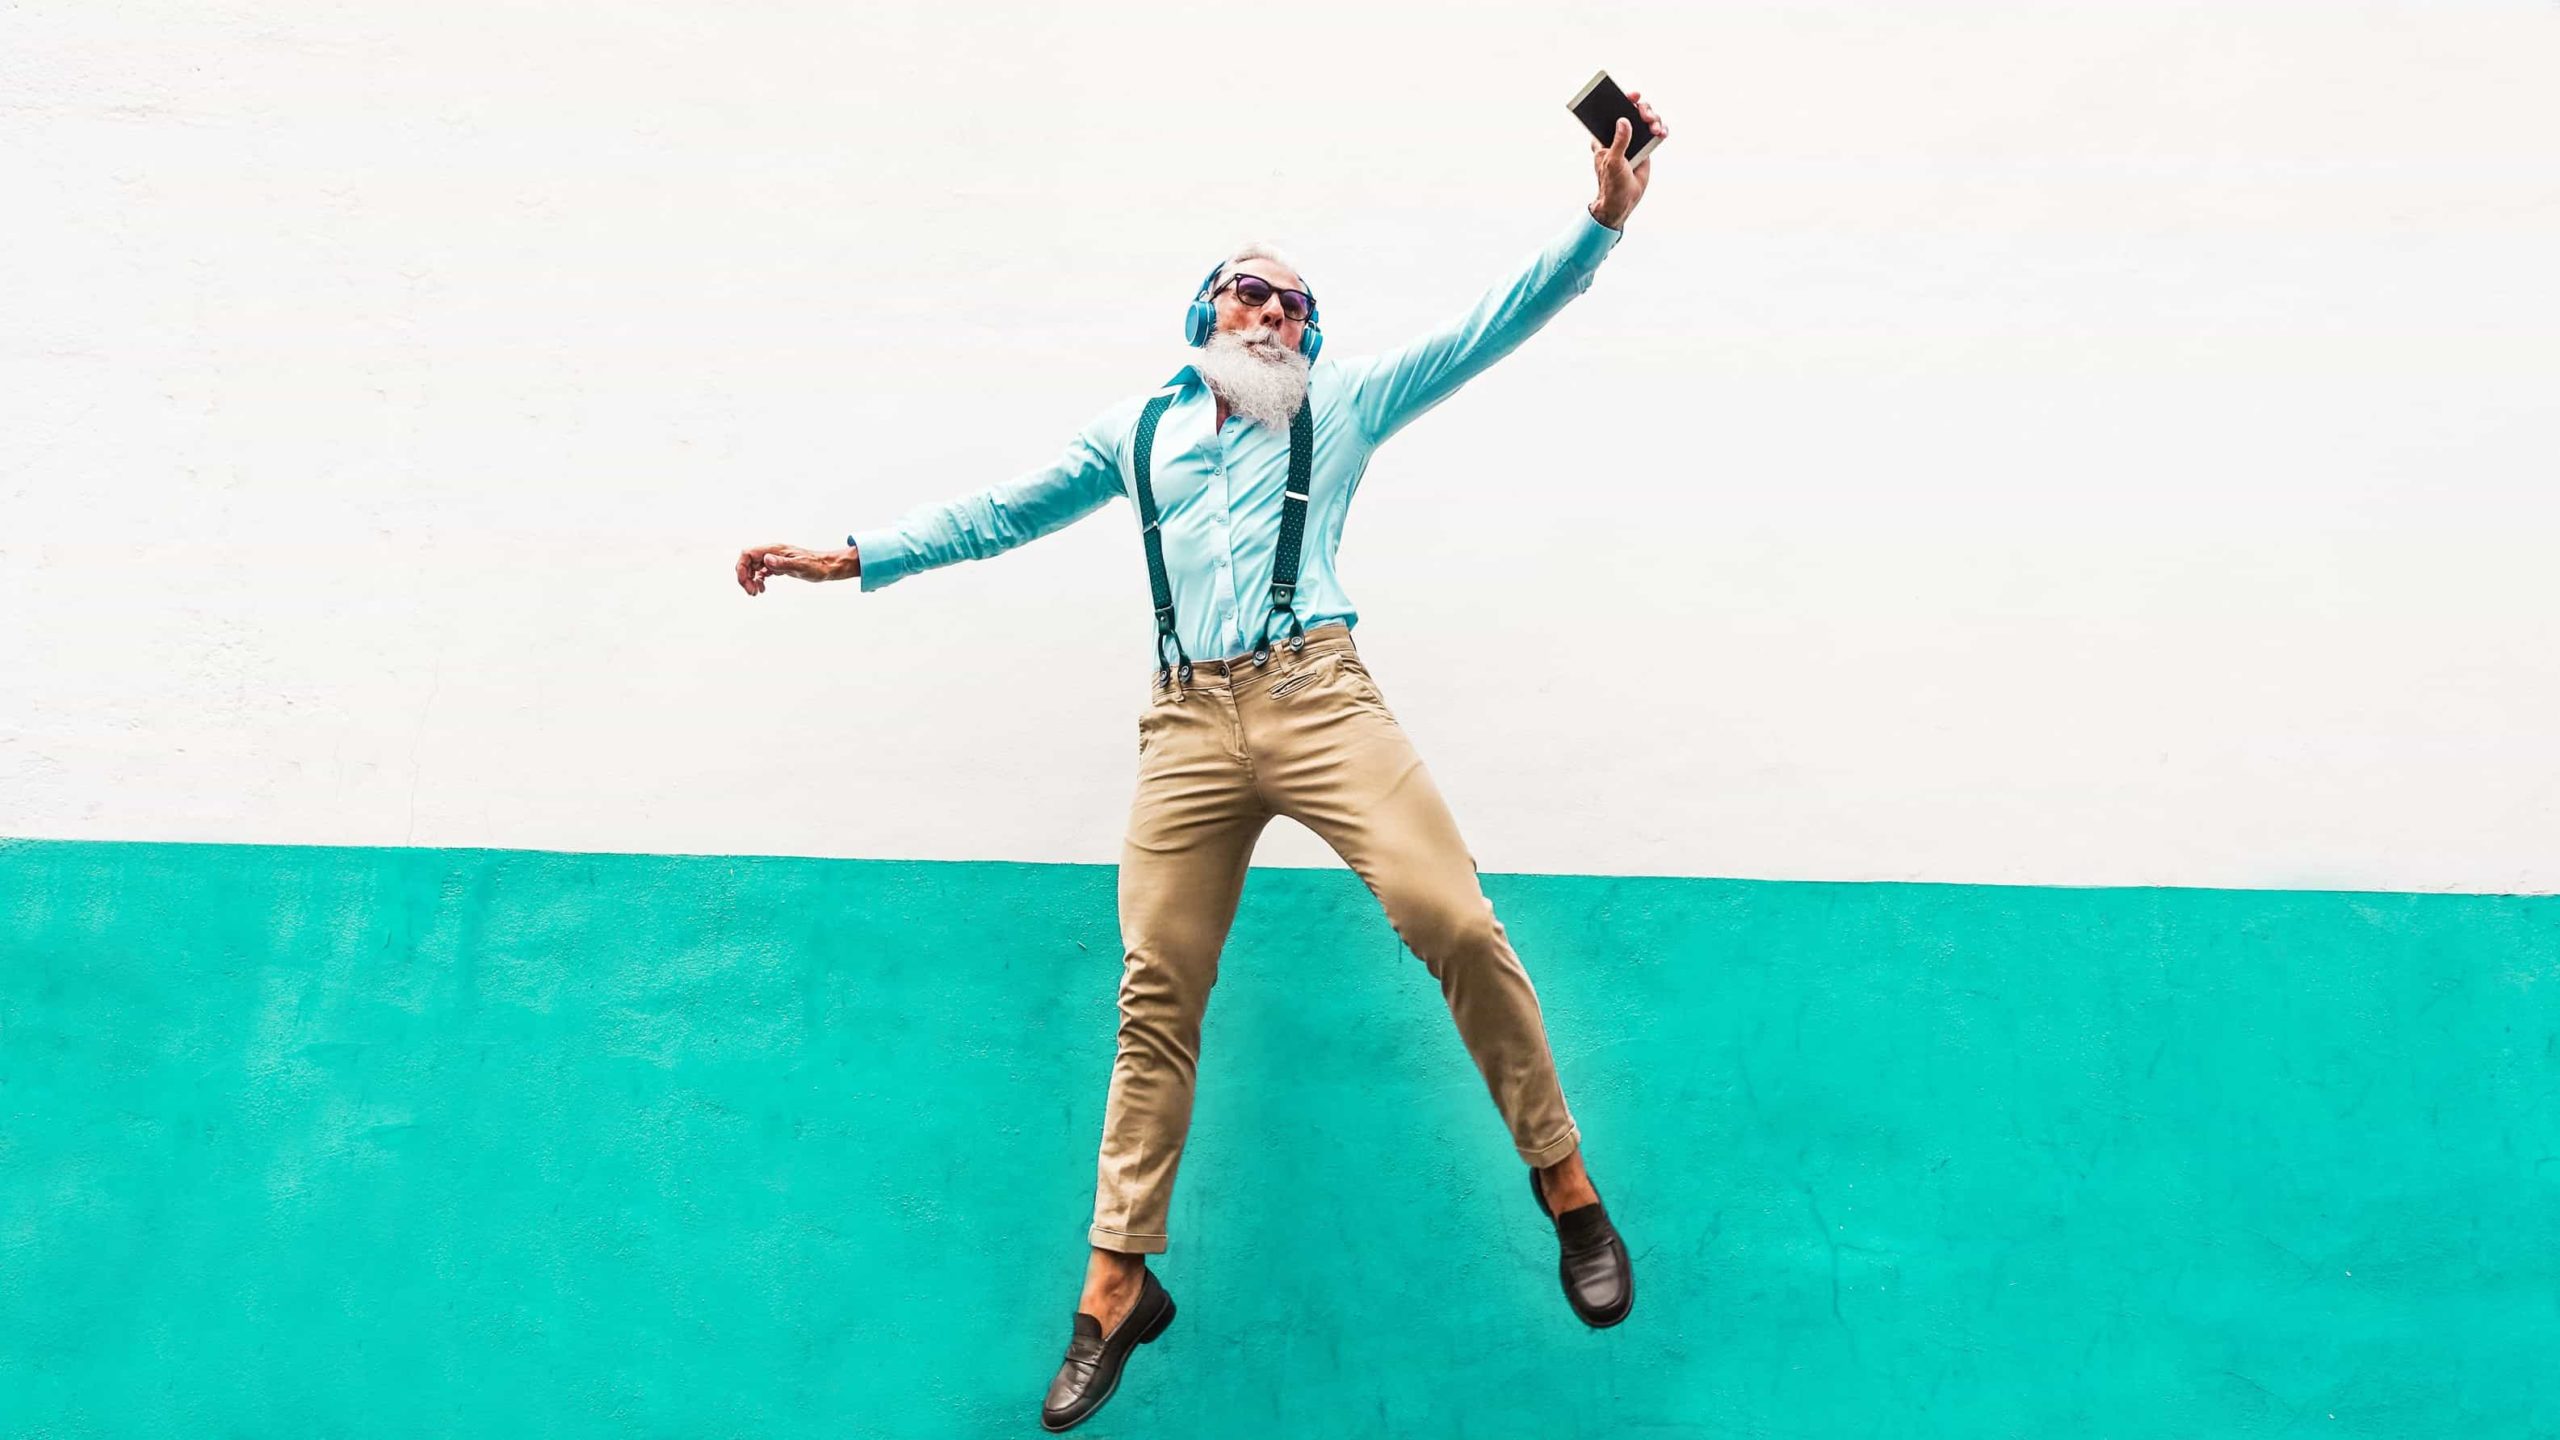 A cool older man leaps in the air wearing headphones and holding his mobile phone.